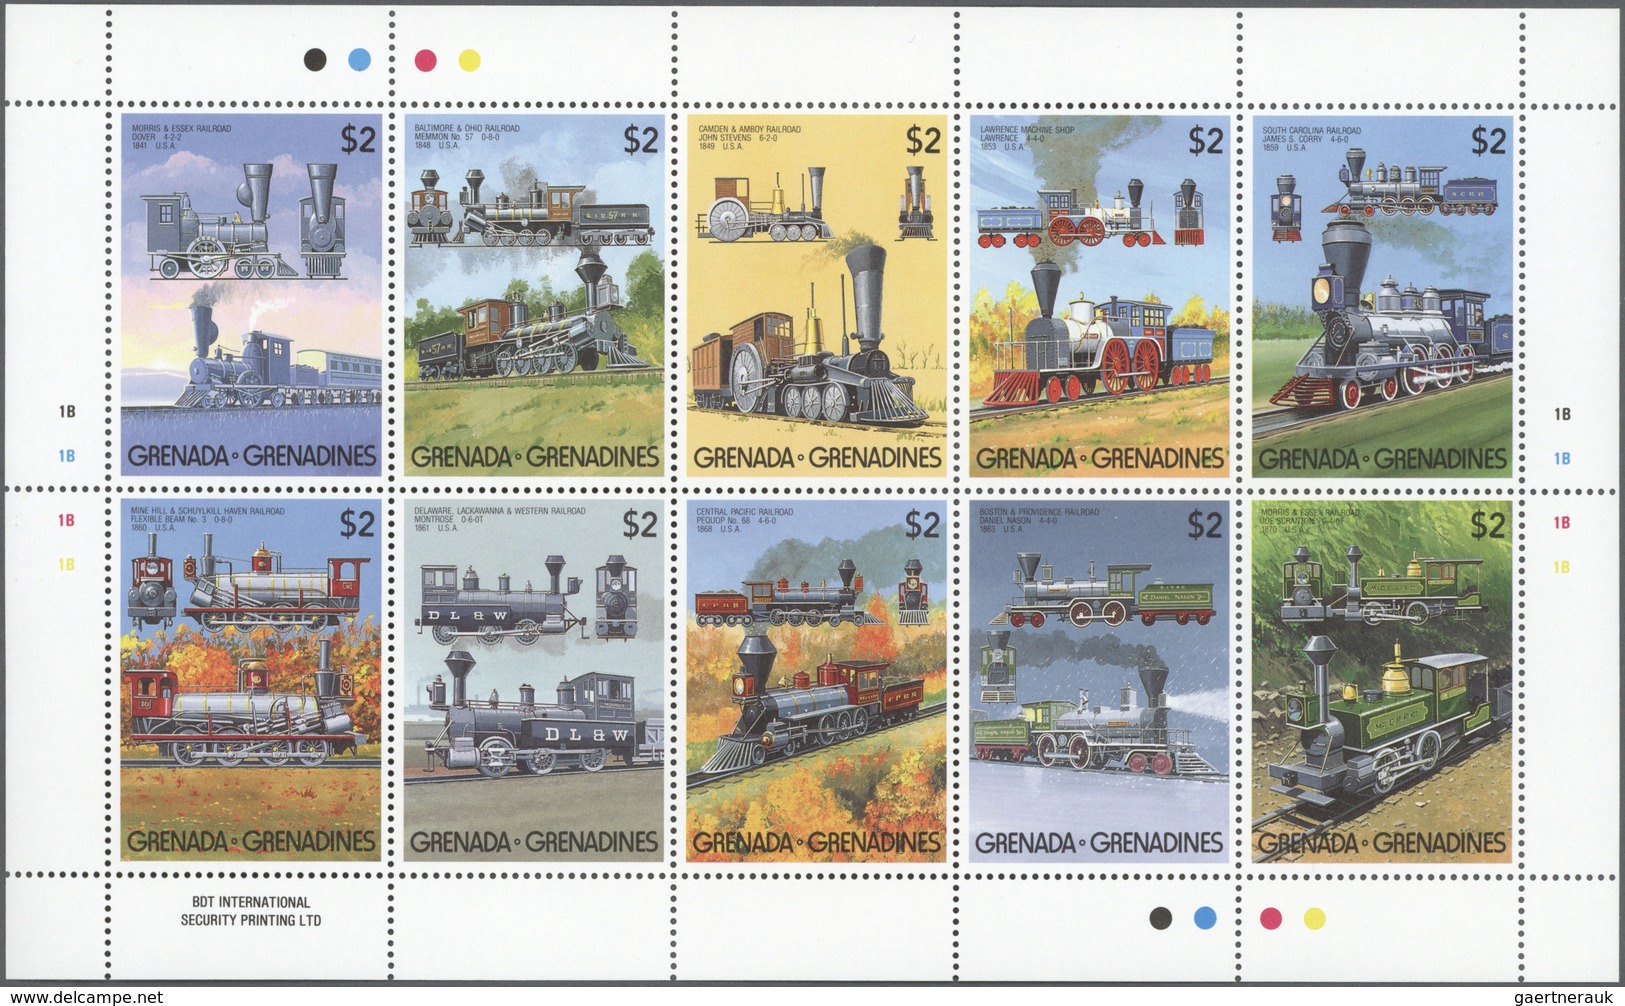 Thematische Philatelie: 1980s/2010 (approx), All World. Large stock of stamps, souvenir and miniatur